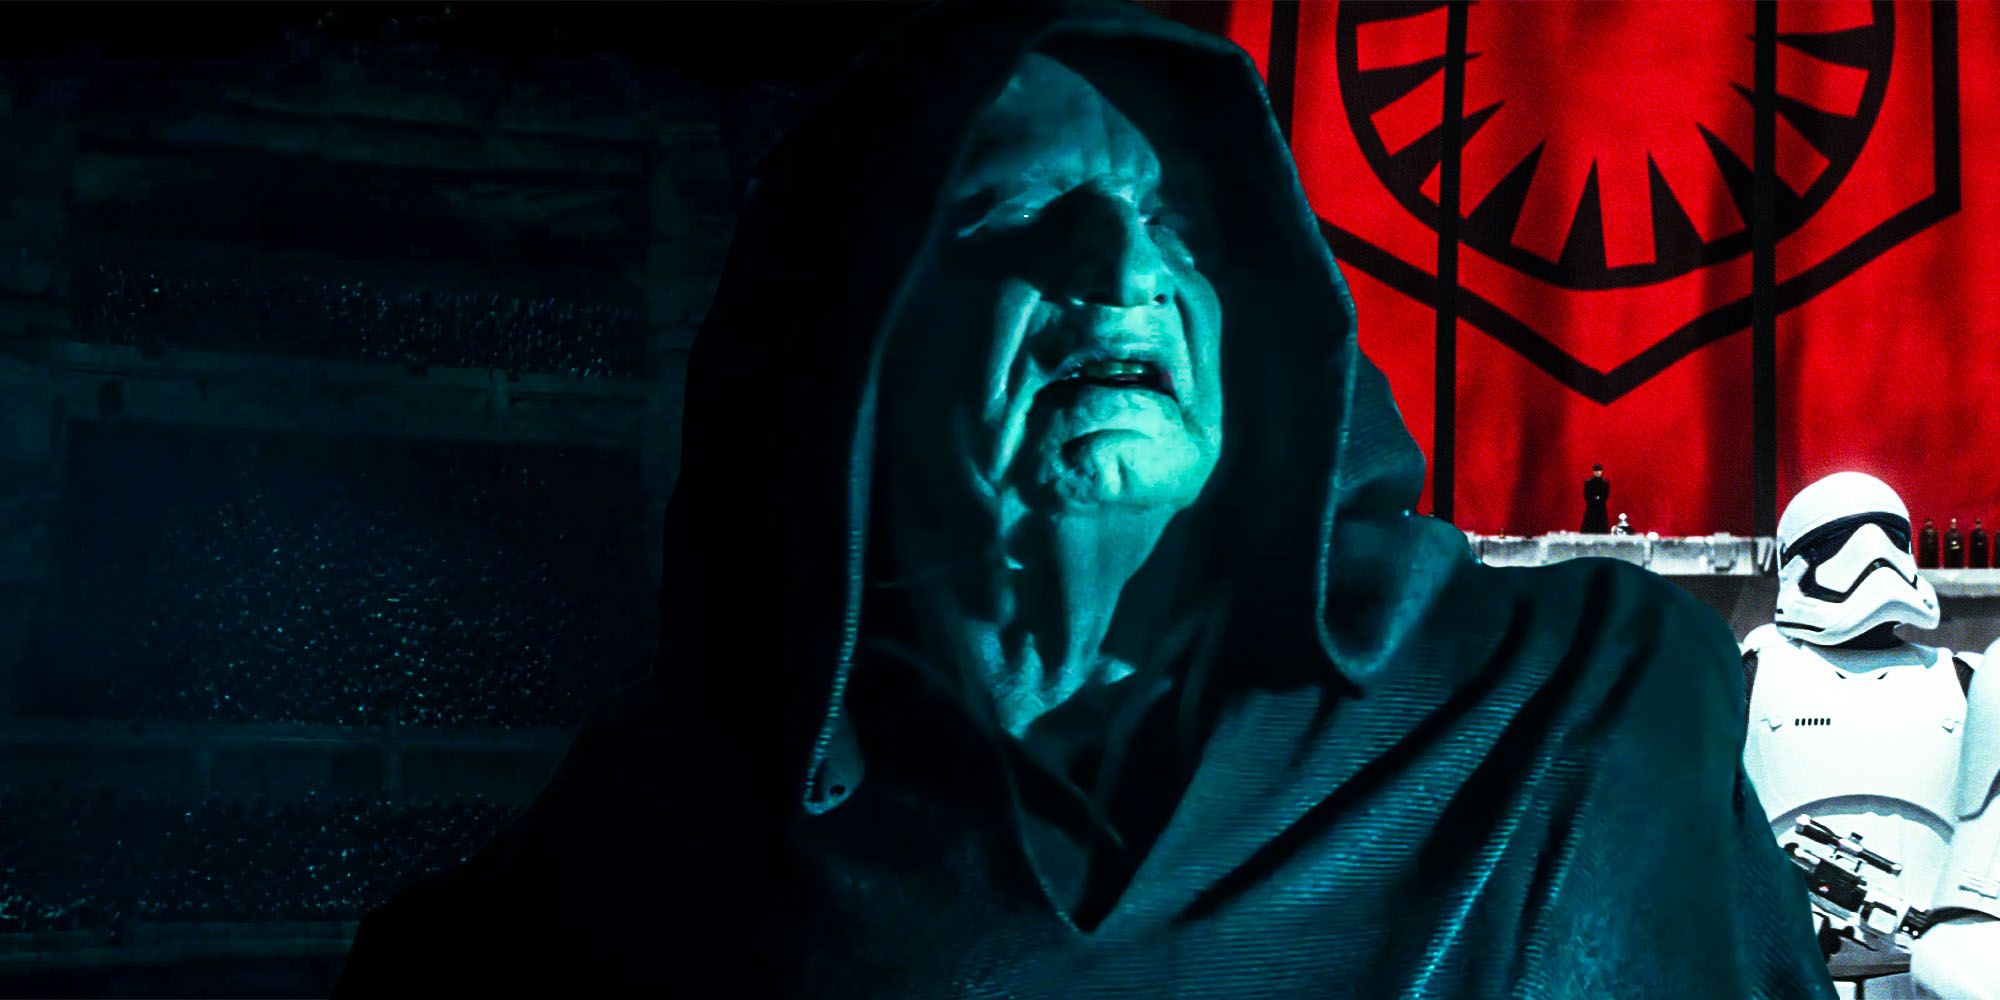 Star wars Palpatine sith eternals created the first order